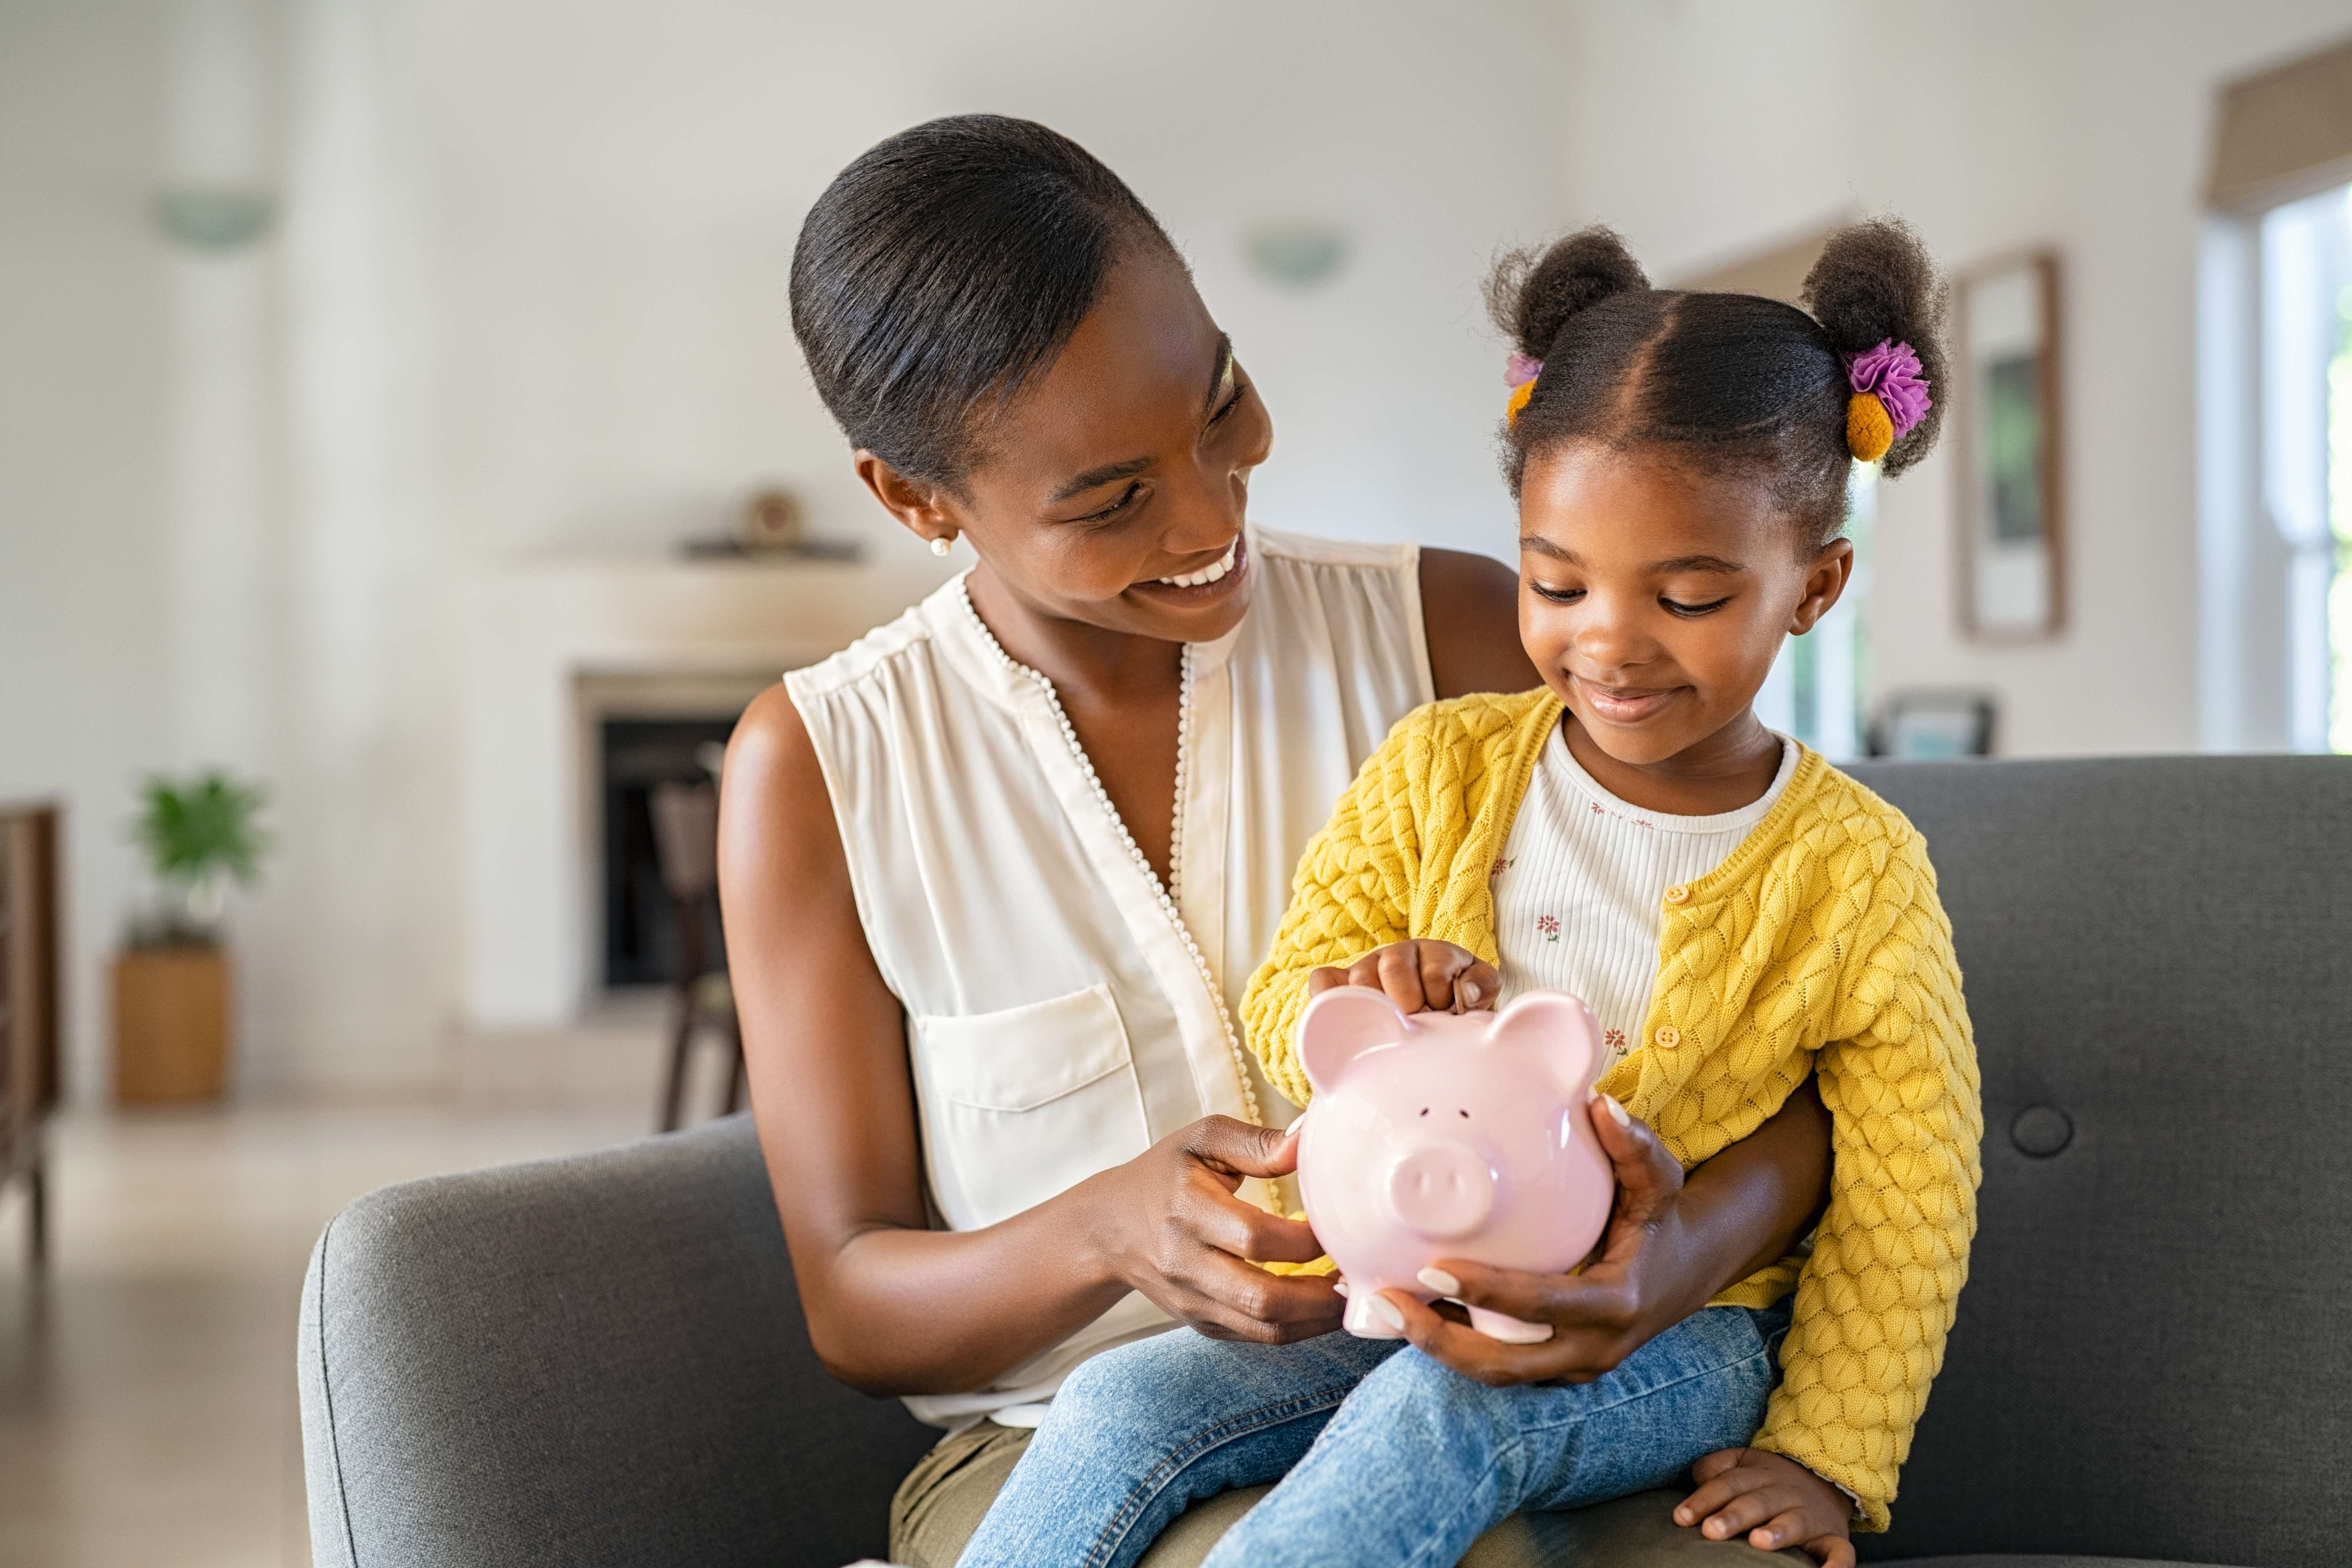 A black lady sits on a sofa in a large living room with a young girl on her lap. The girl is around 6 years old with bunches in her hair and is holding a pink pig money bank. She is putting a coin into the bank and both are smiling